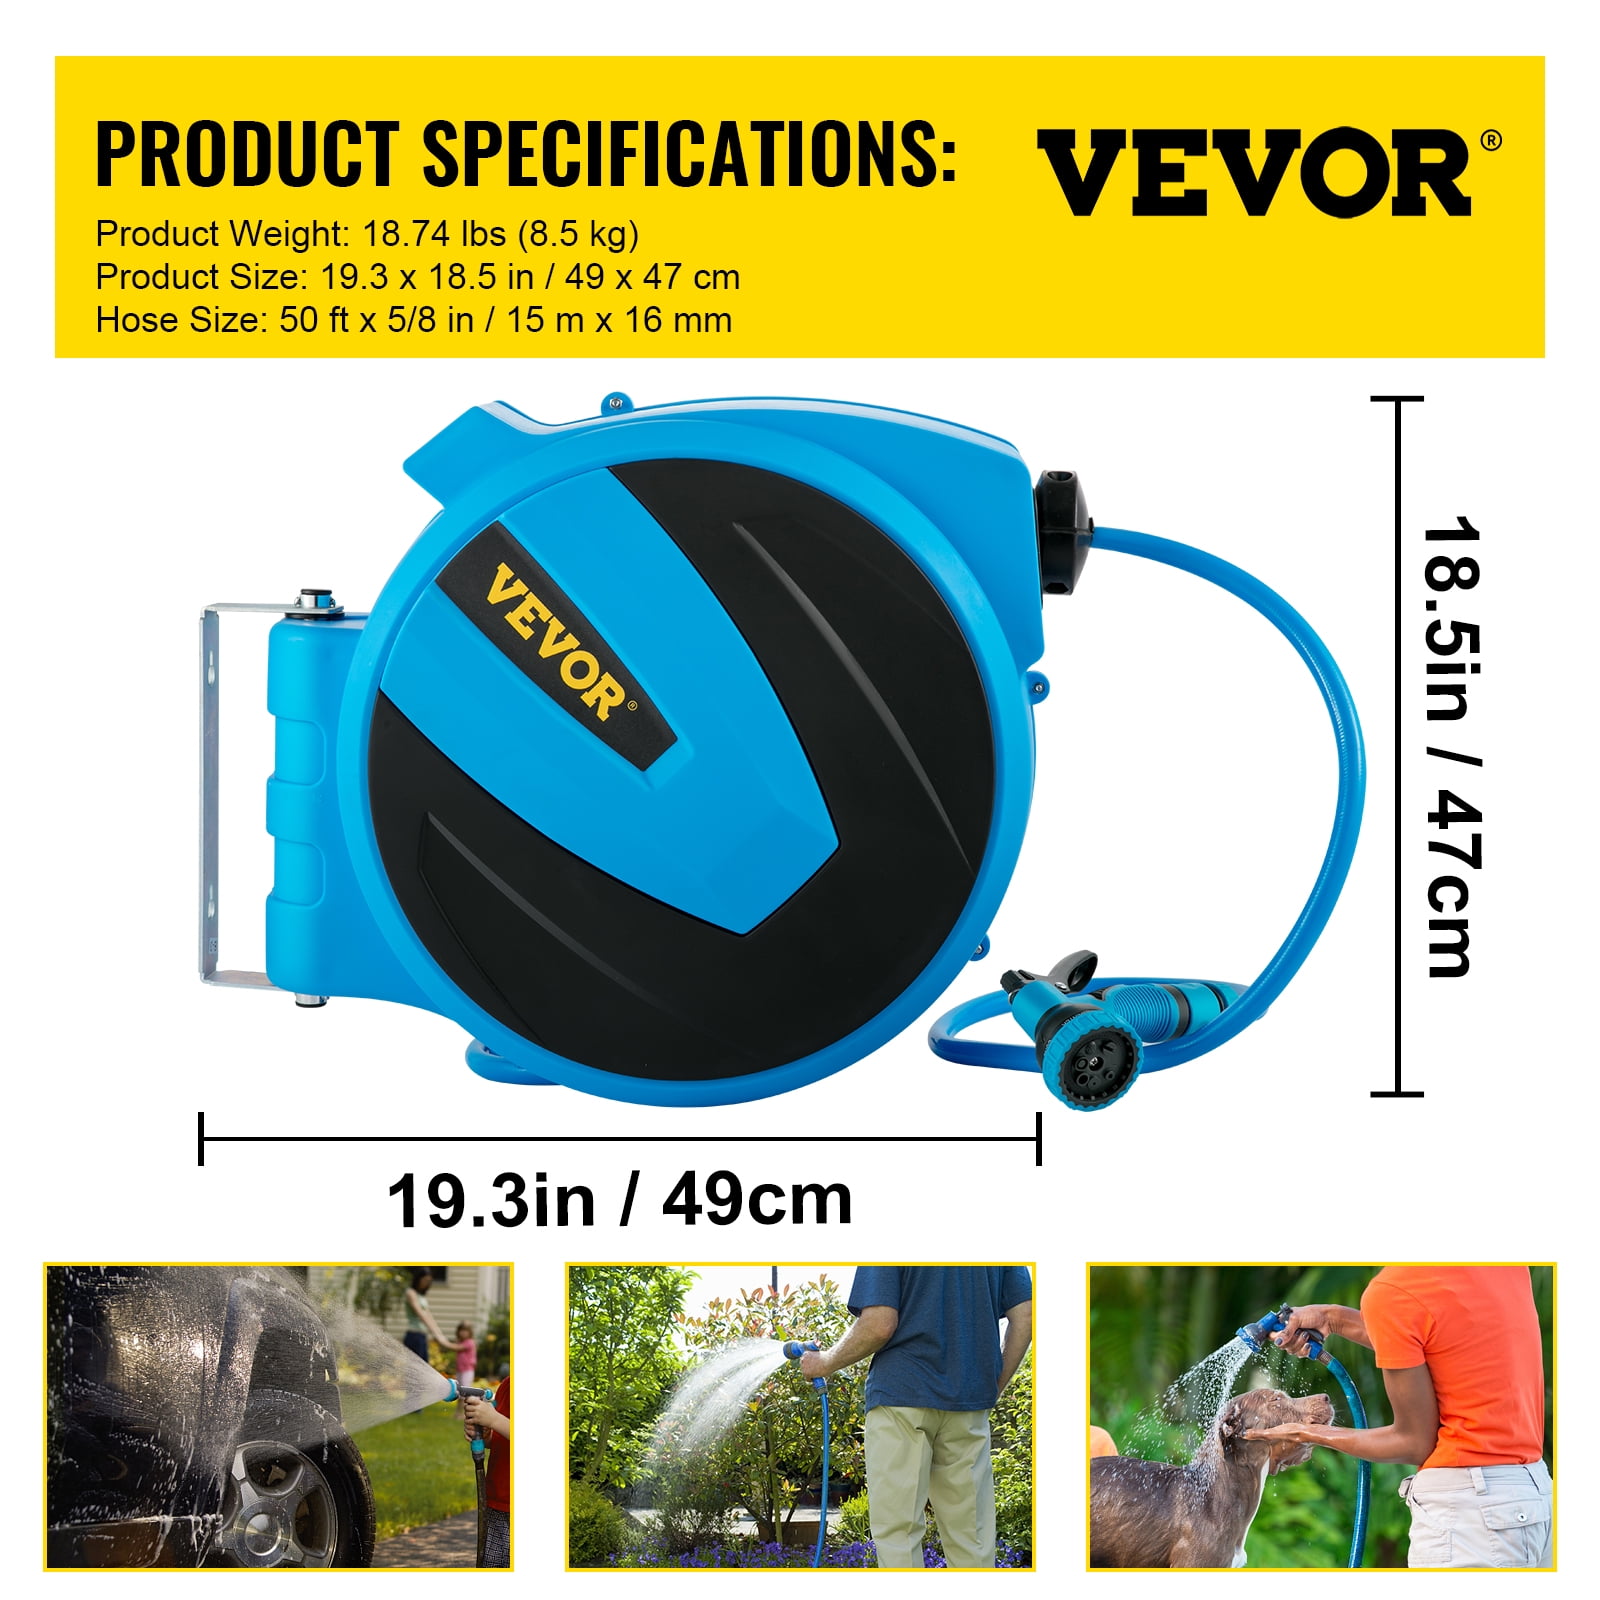 VEVOR Retractable Hose Reel, 5/8 inch x 50 ft, Any Length Lock & Automatic  Rewind Water Hose, Wall Mounted Garden Hose Reel With 180° Swivel Bracket  and 7 Pattern Hose Nozzle, Blue 